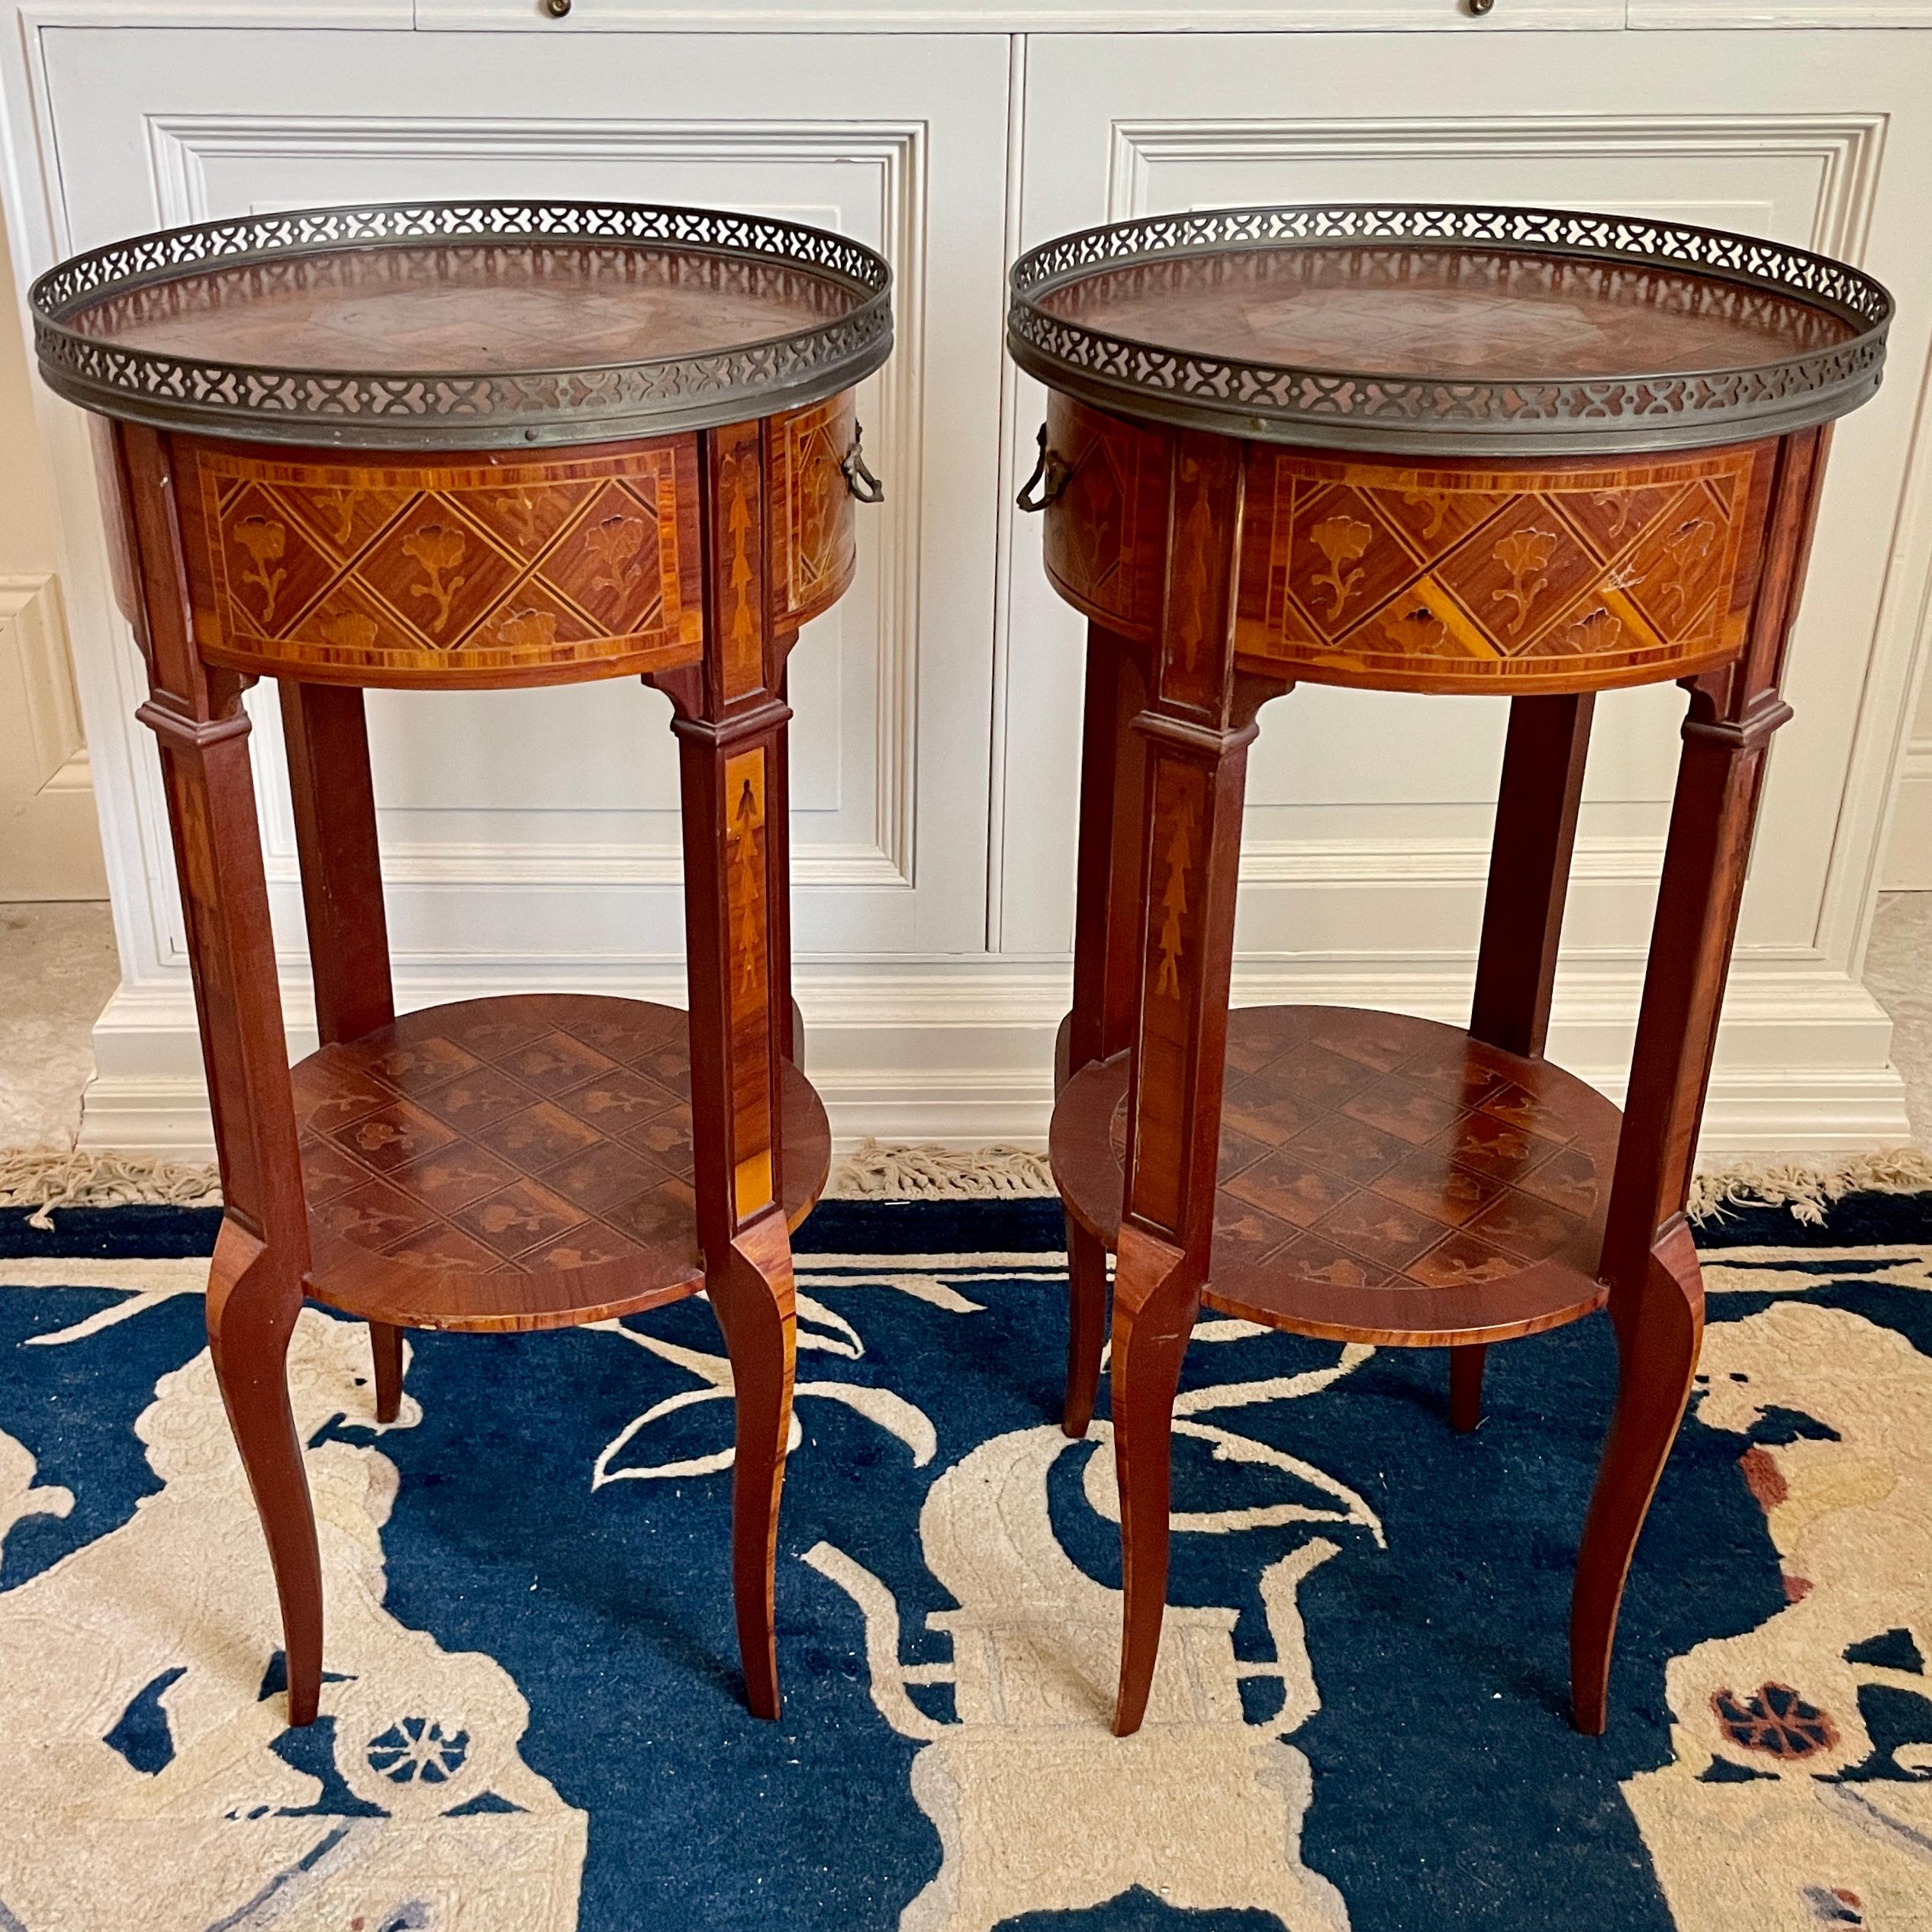 19th Century French Transition Side Tables, a Pair For Sale